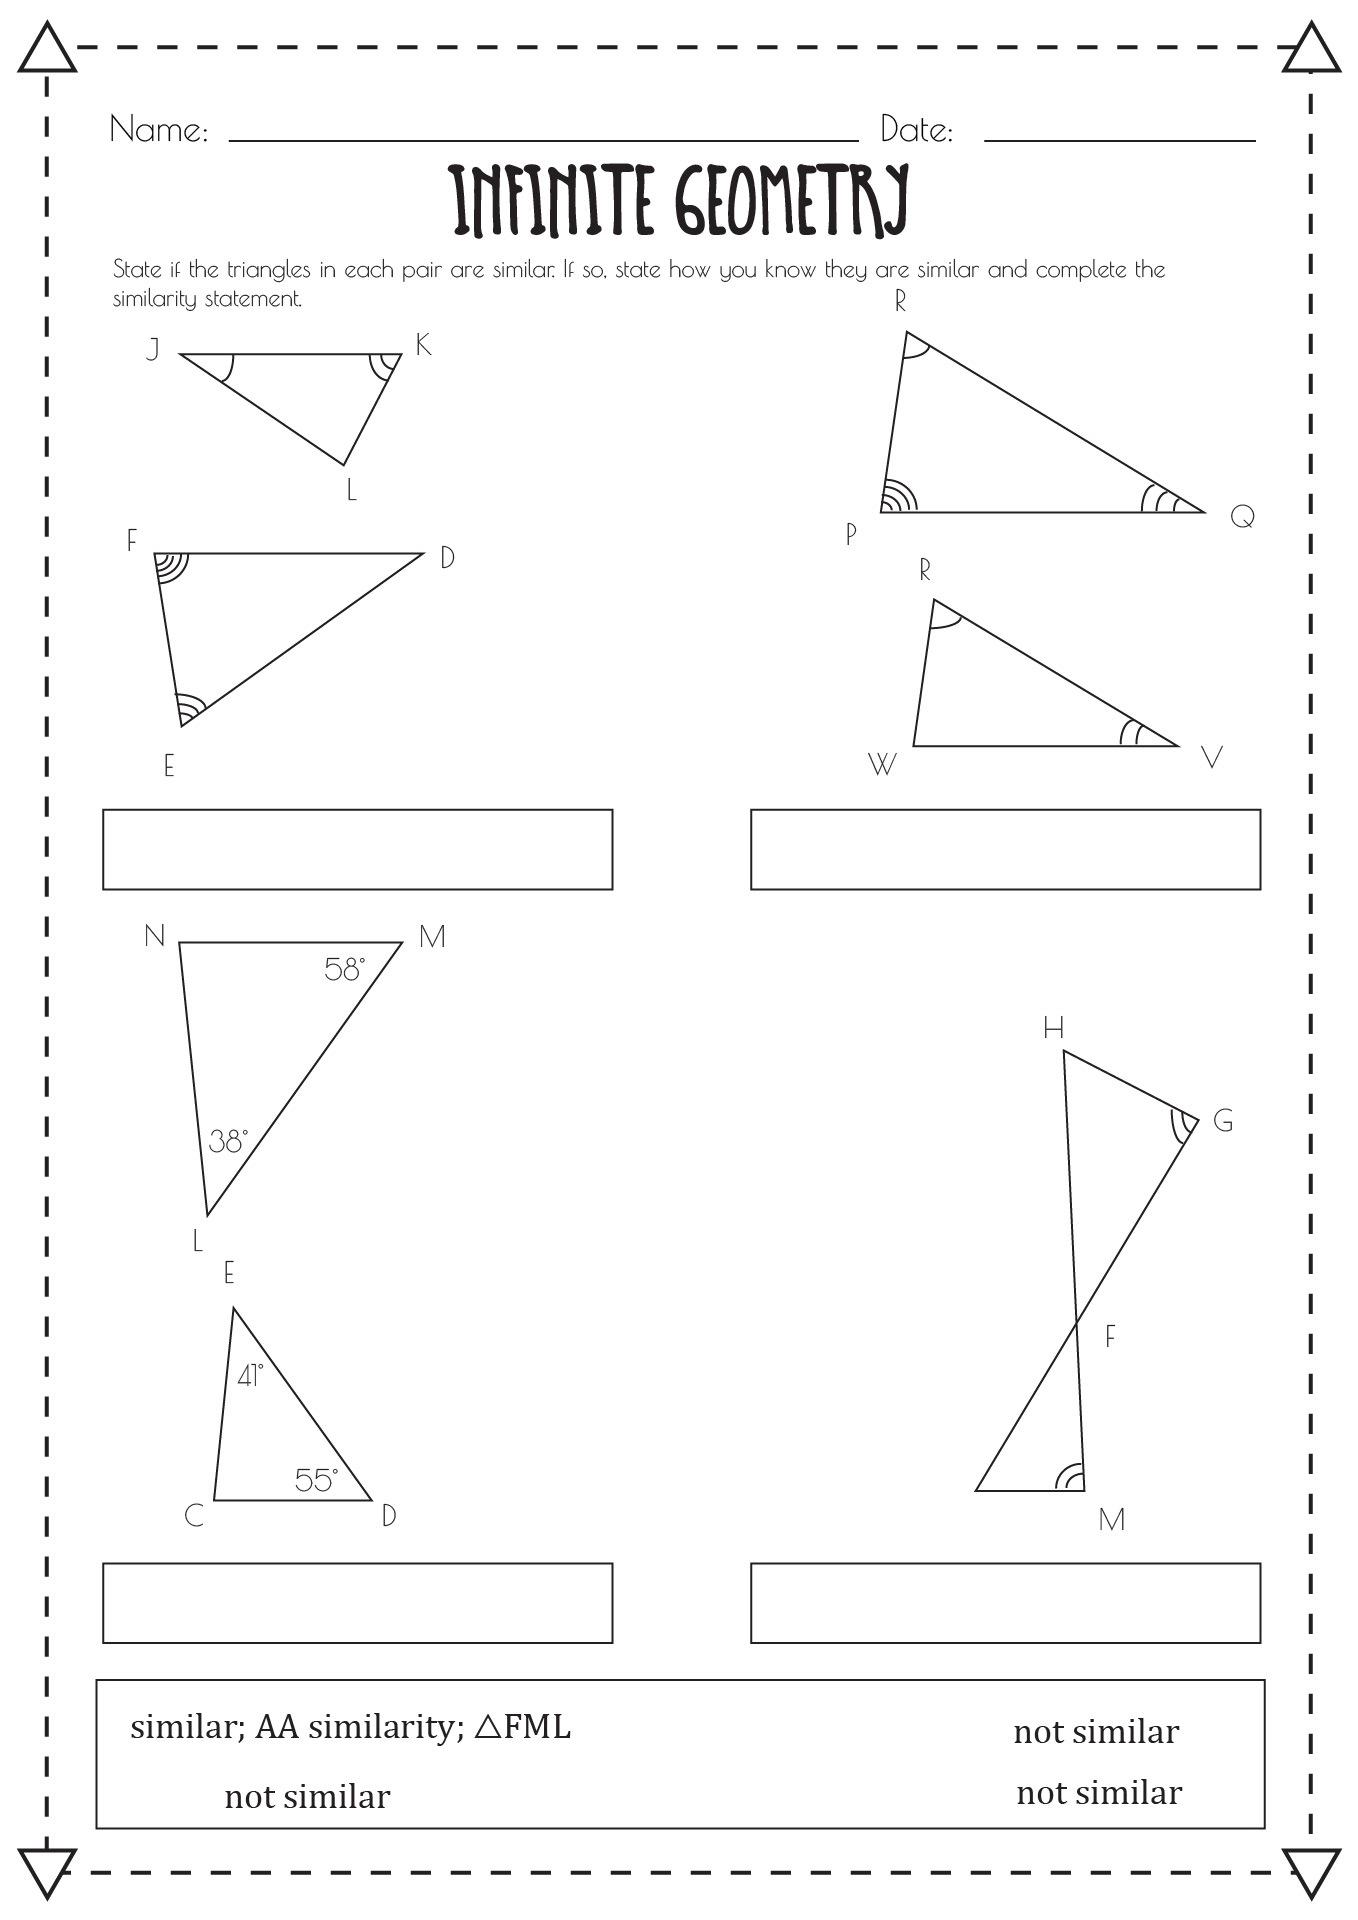 13 Best Images Of Proving Triangles Congruent Worksheet SSS And SAS Congruent Triangles